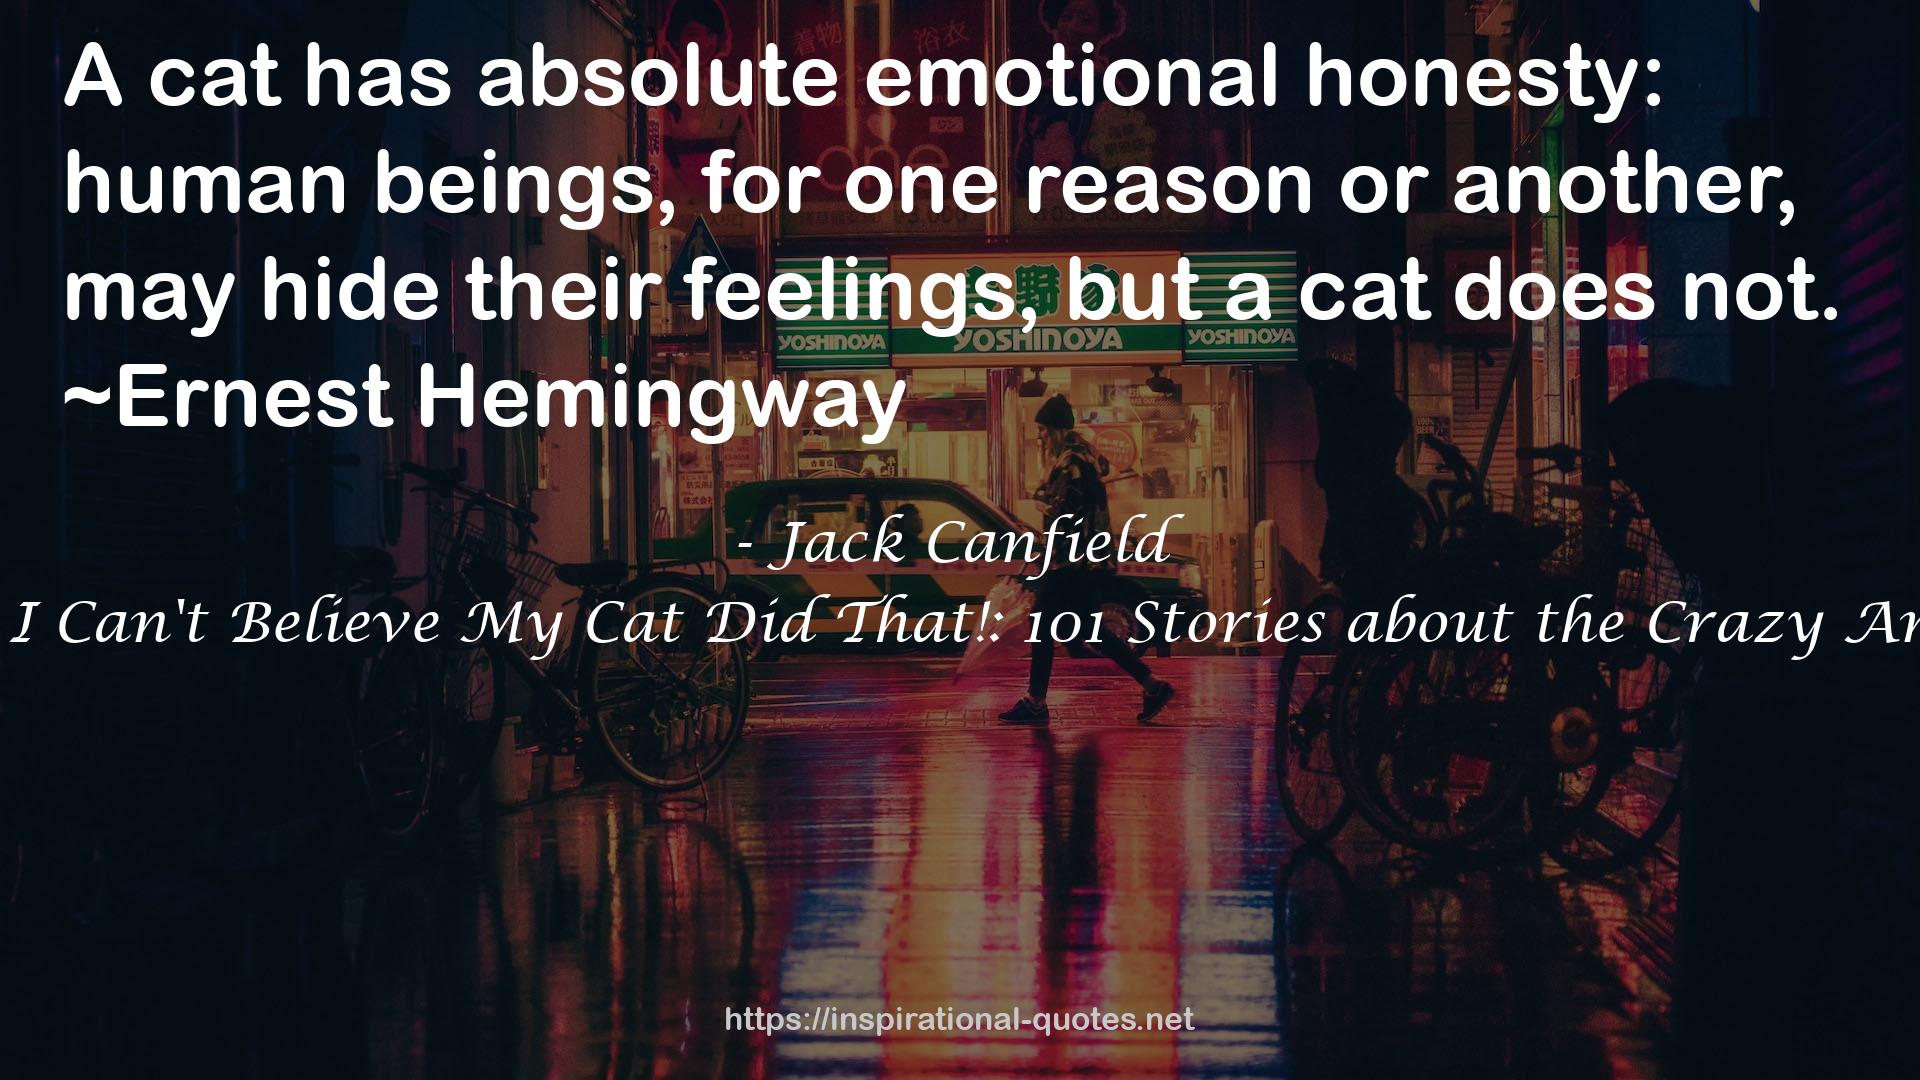 Chicken Soup for the Soul: I Can't Believe My Cat Did That!: 101 Stories about the Crazy Antics of Our Feline Friends QUOTES